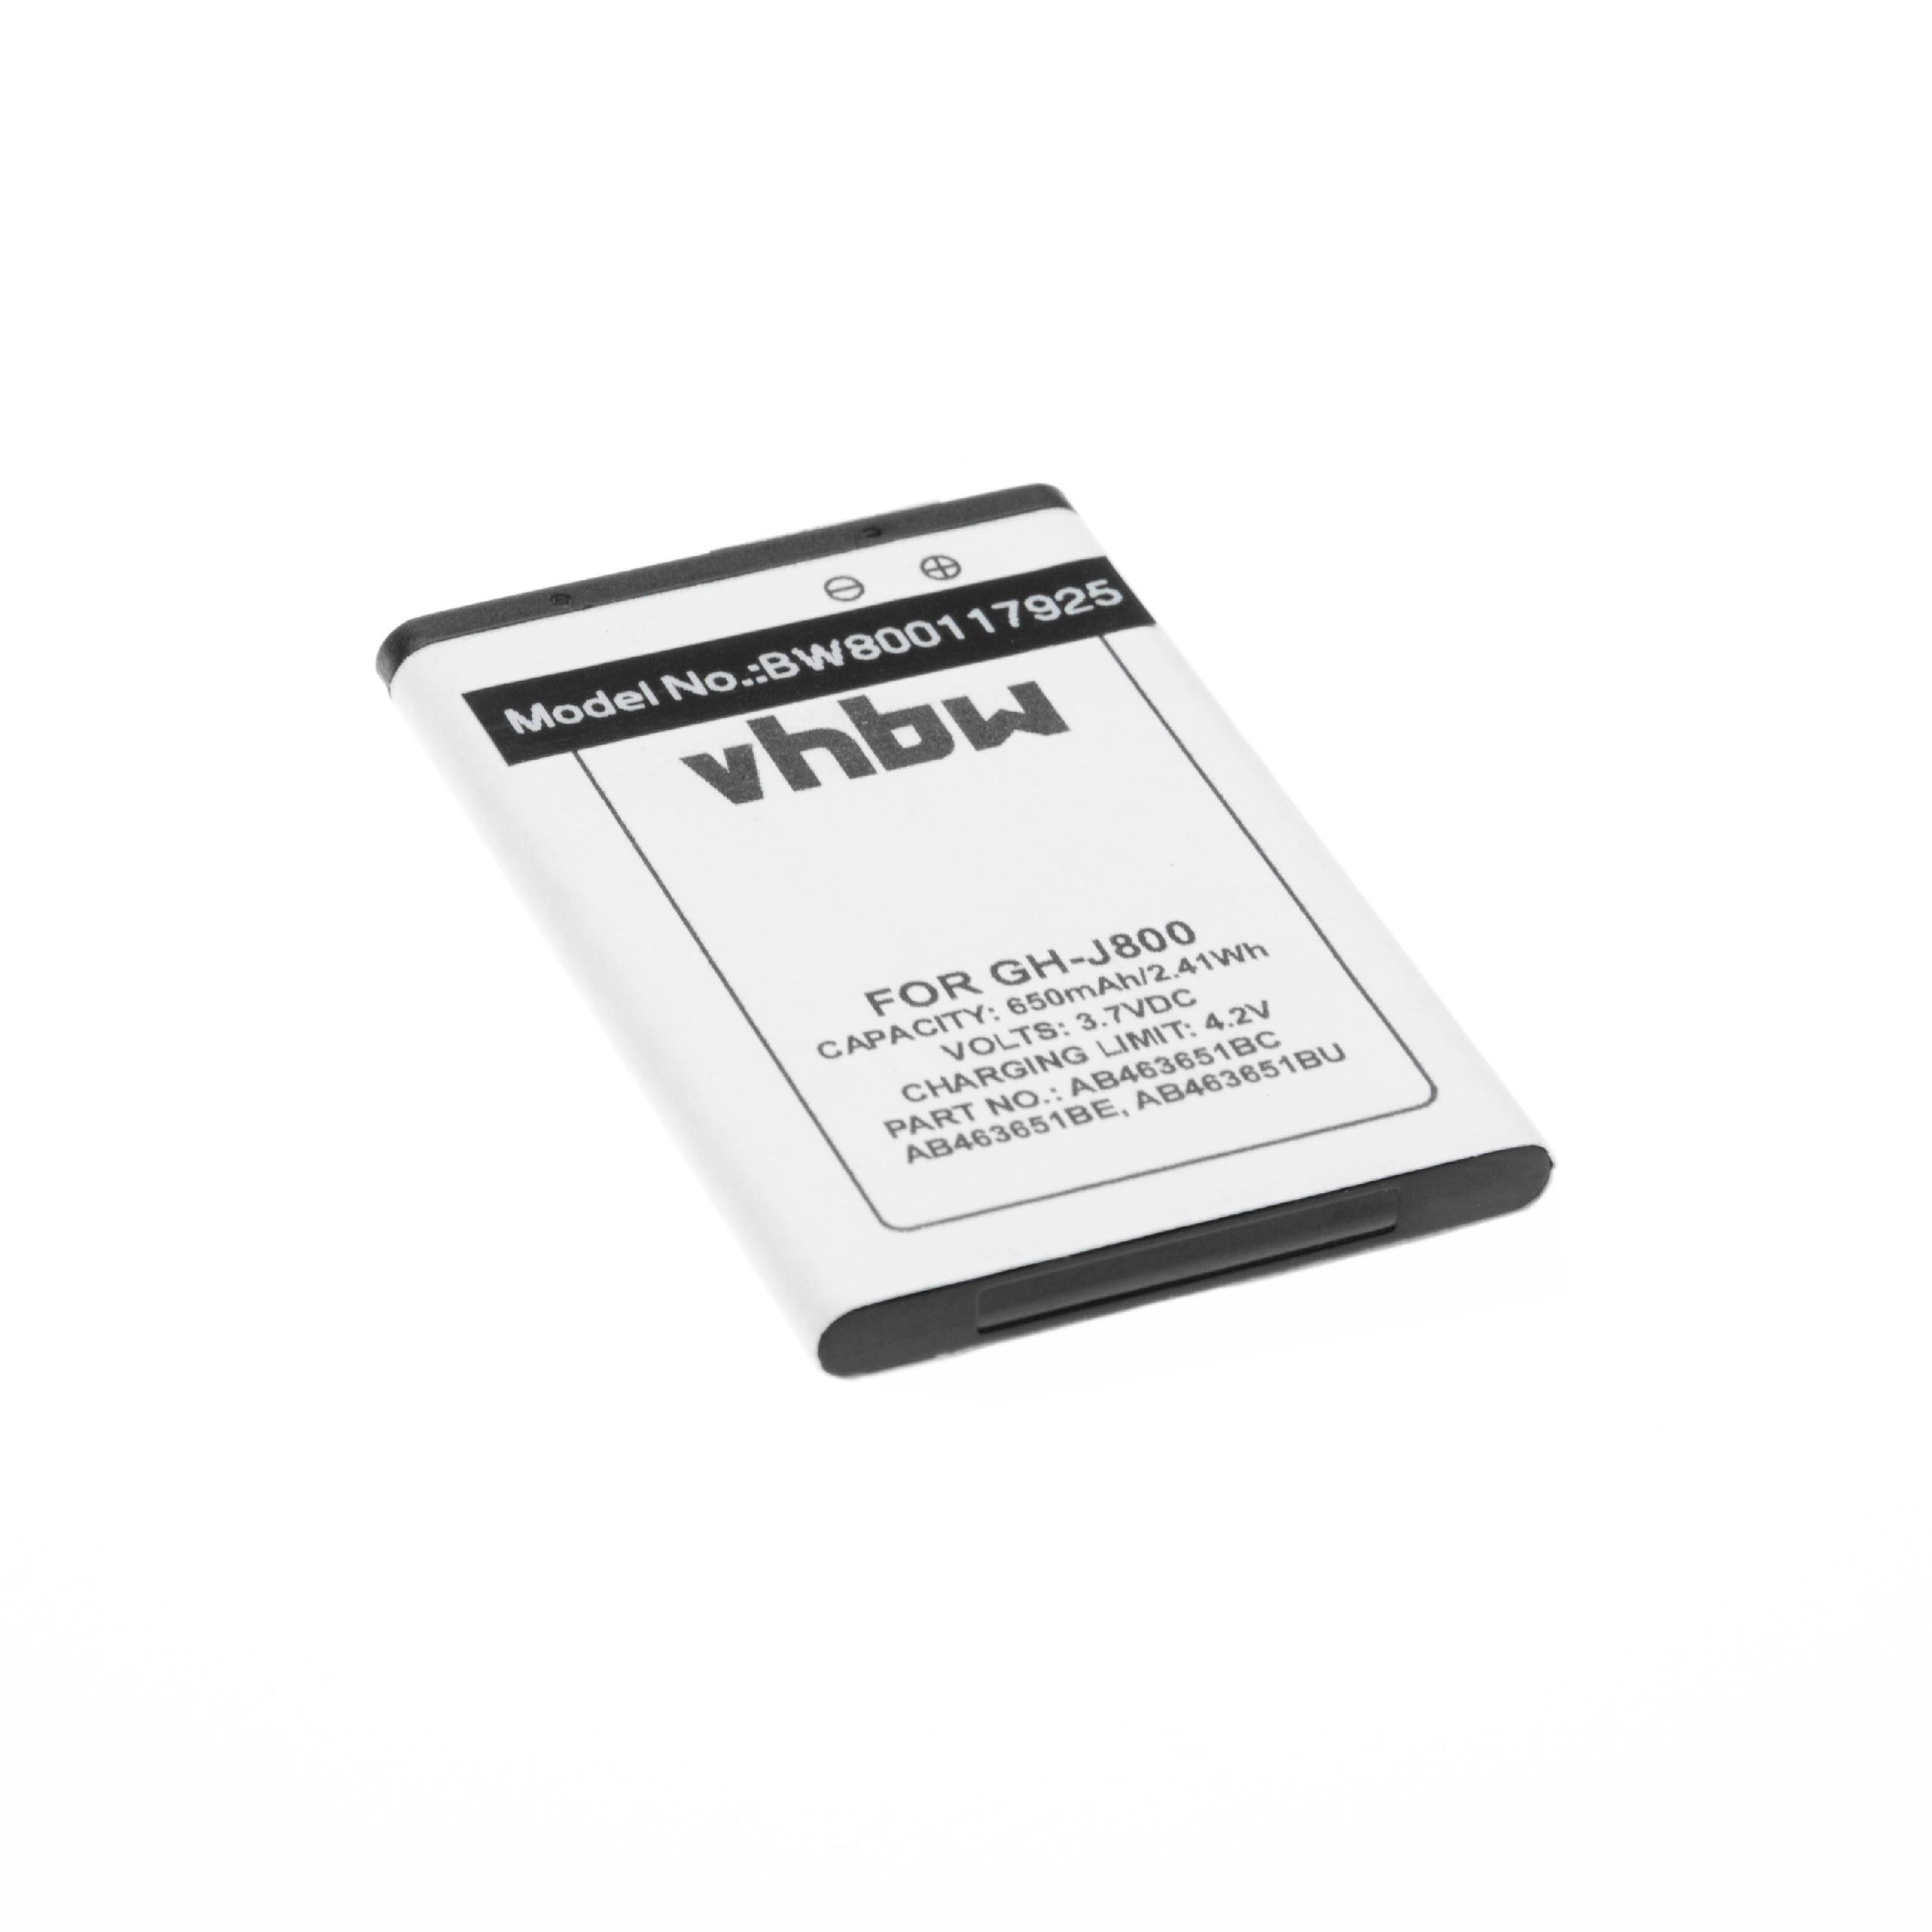 Mobile Phone Battery Replacement for Samsung AB463651BABSTD, AB463651BA, AB463651BC - 650mAh 3.7V Li-Ion